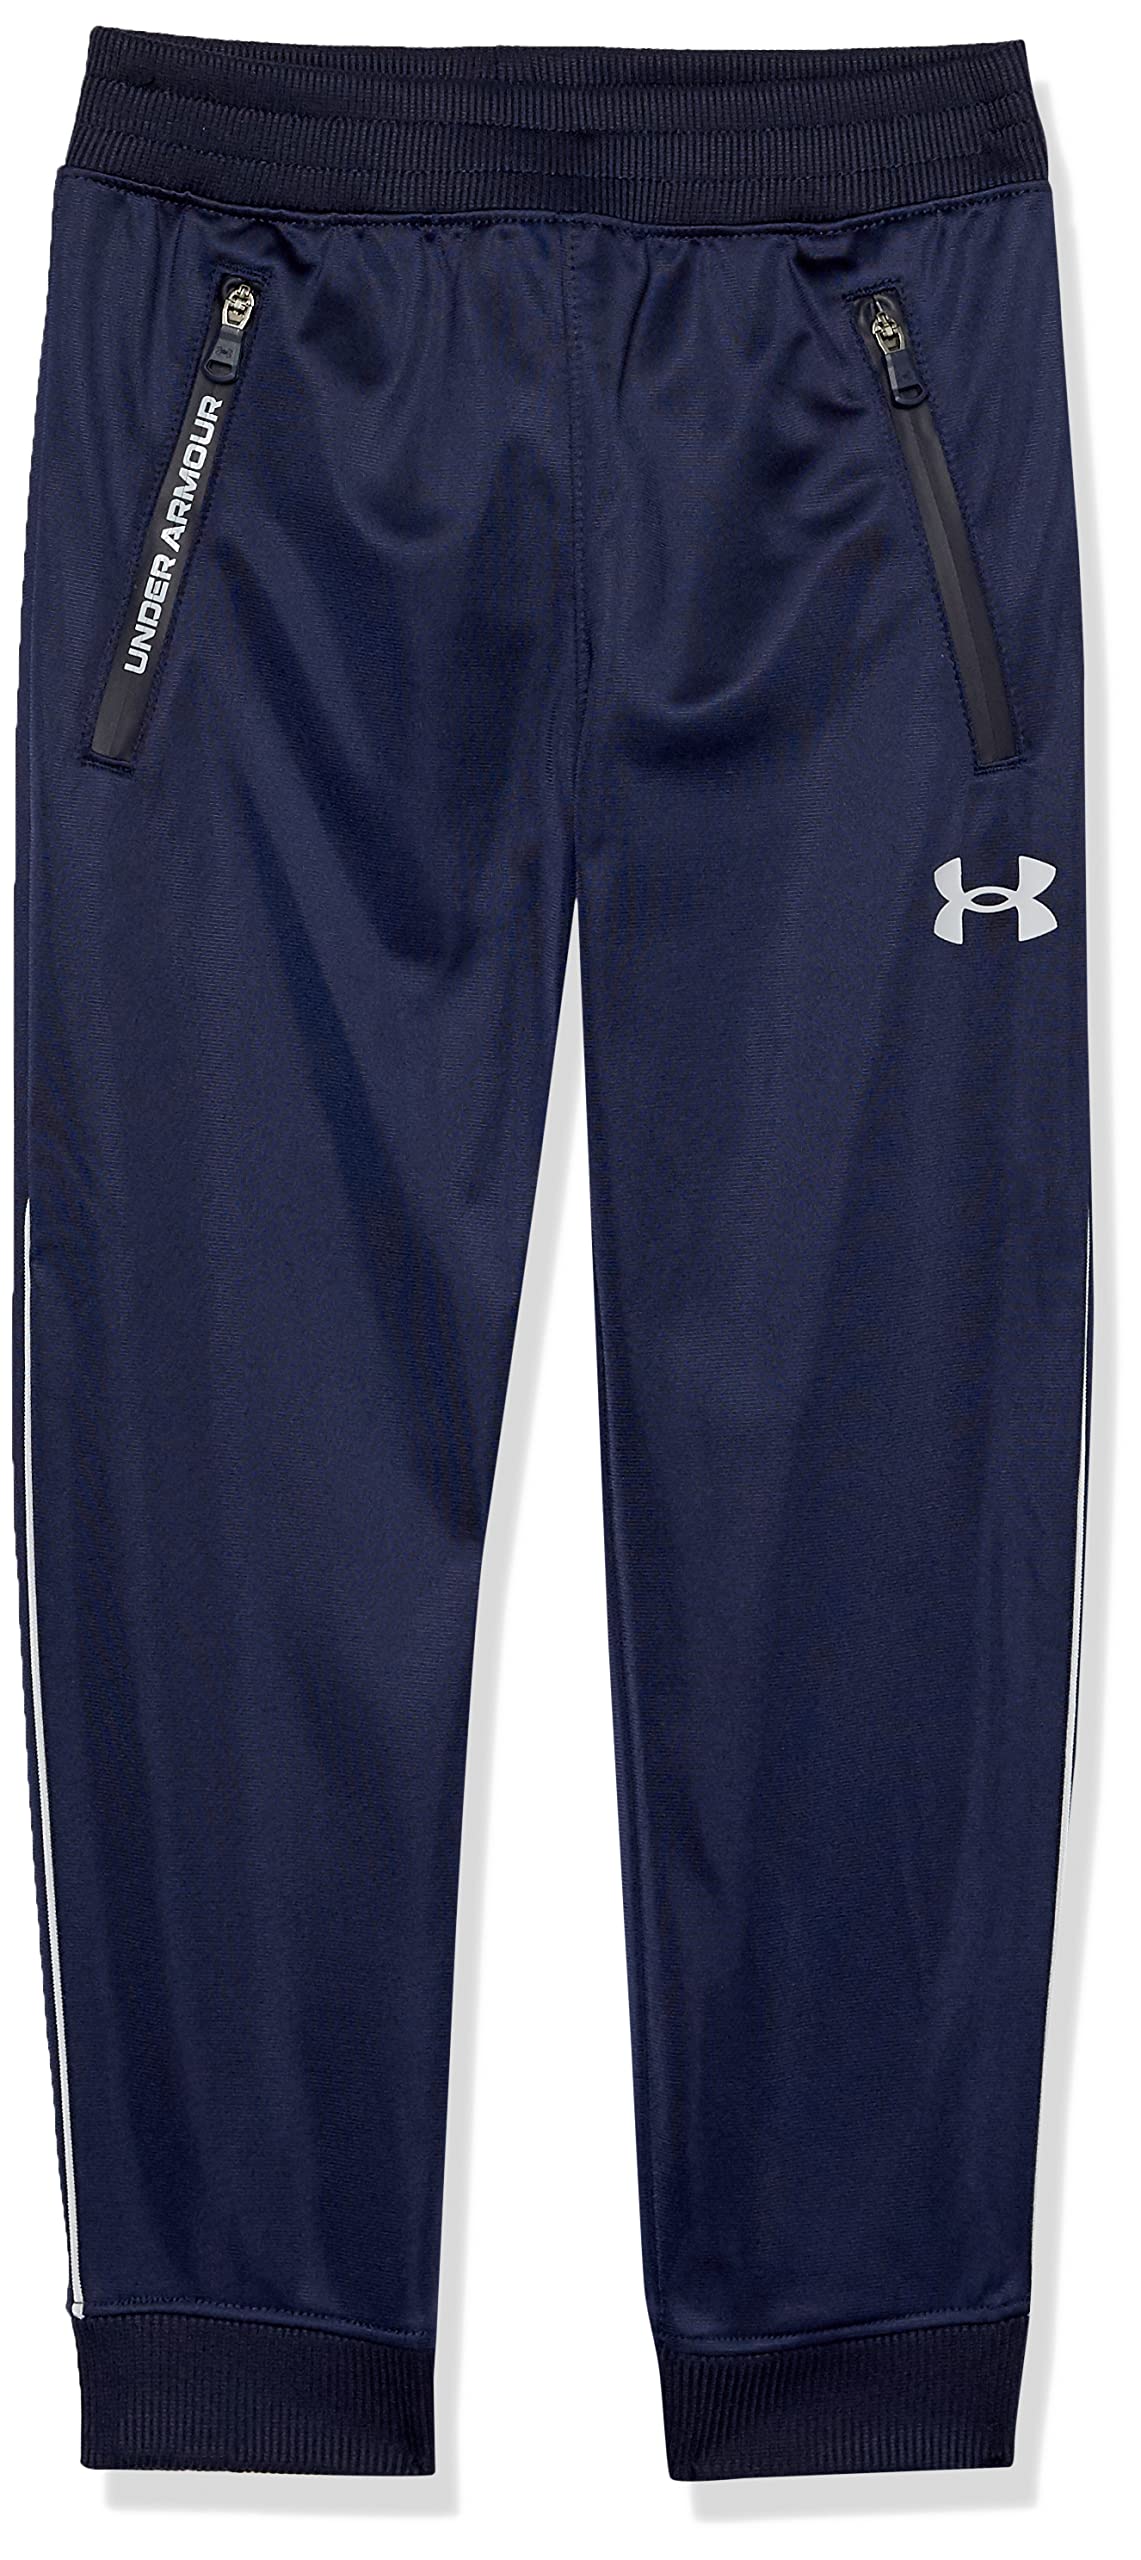 Under Armour Boys' Pennant Tapered Pant, Zipper Pockets